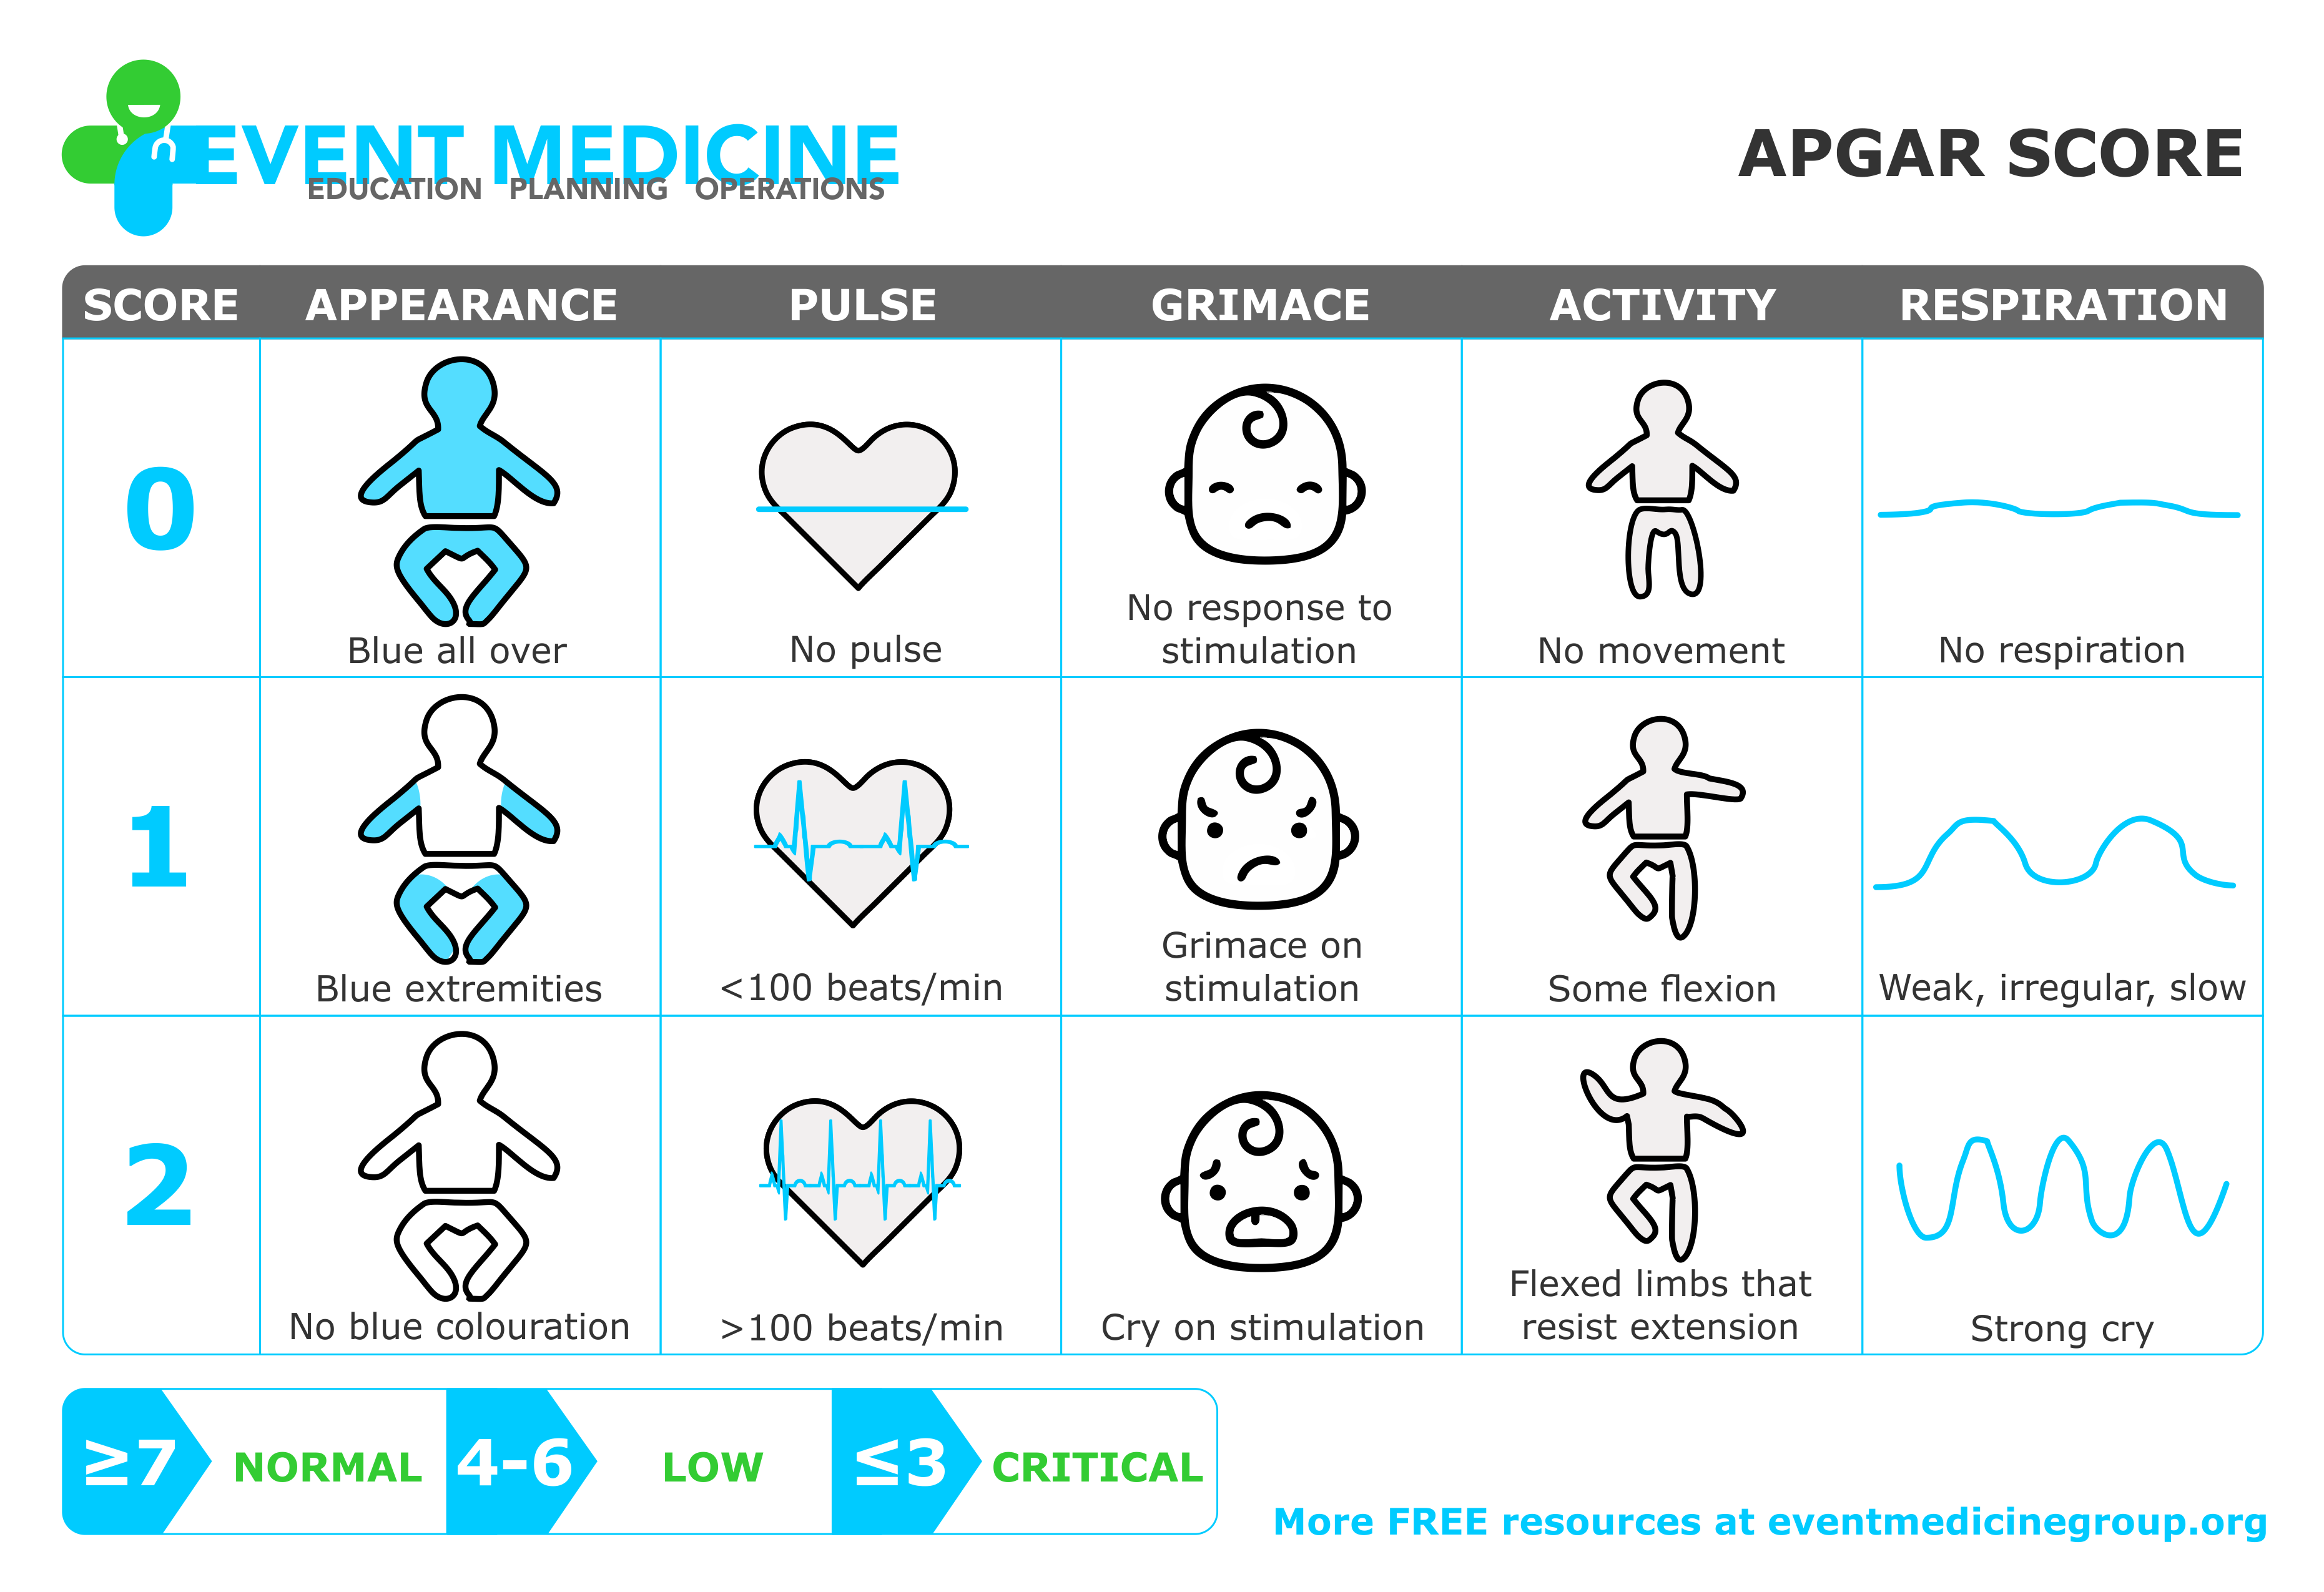 The Apgar assessment.^[[Image](https://www.eventmedicinegroup.org/patientassessment/) by [Event Medicine Group](https://www.eventmedicinegroup.org/)]